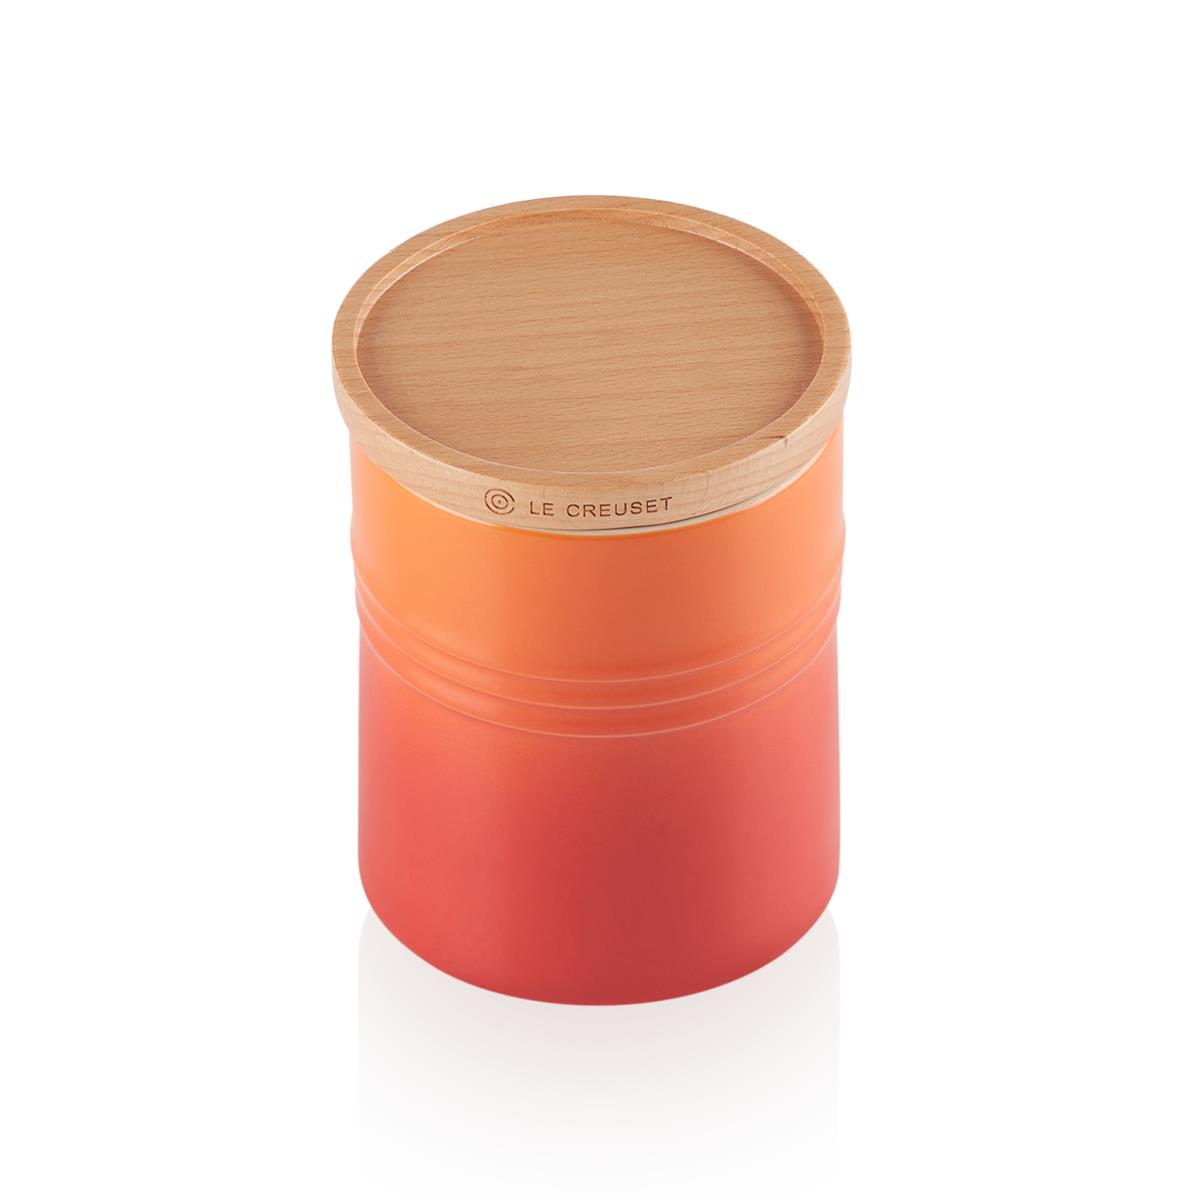 What features does the le creuset storage jar have?